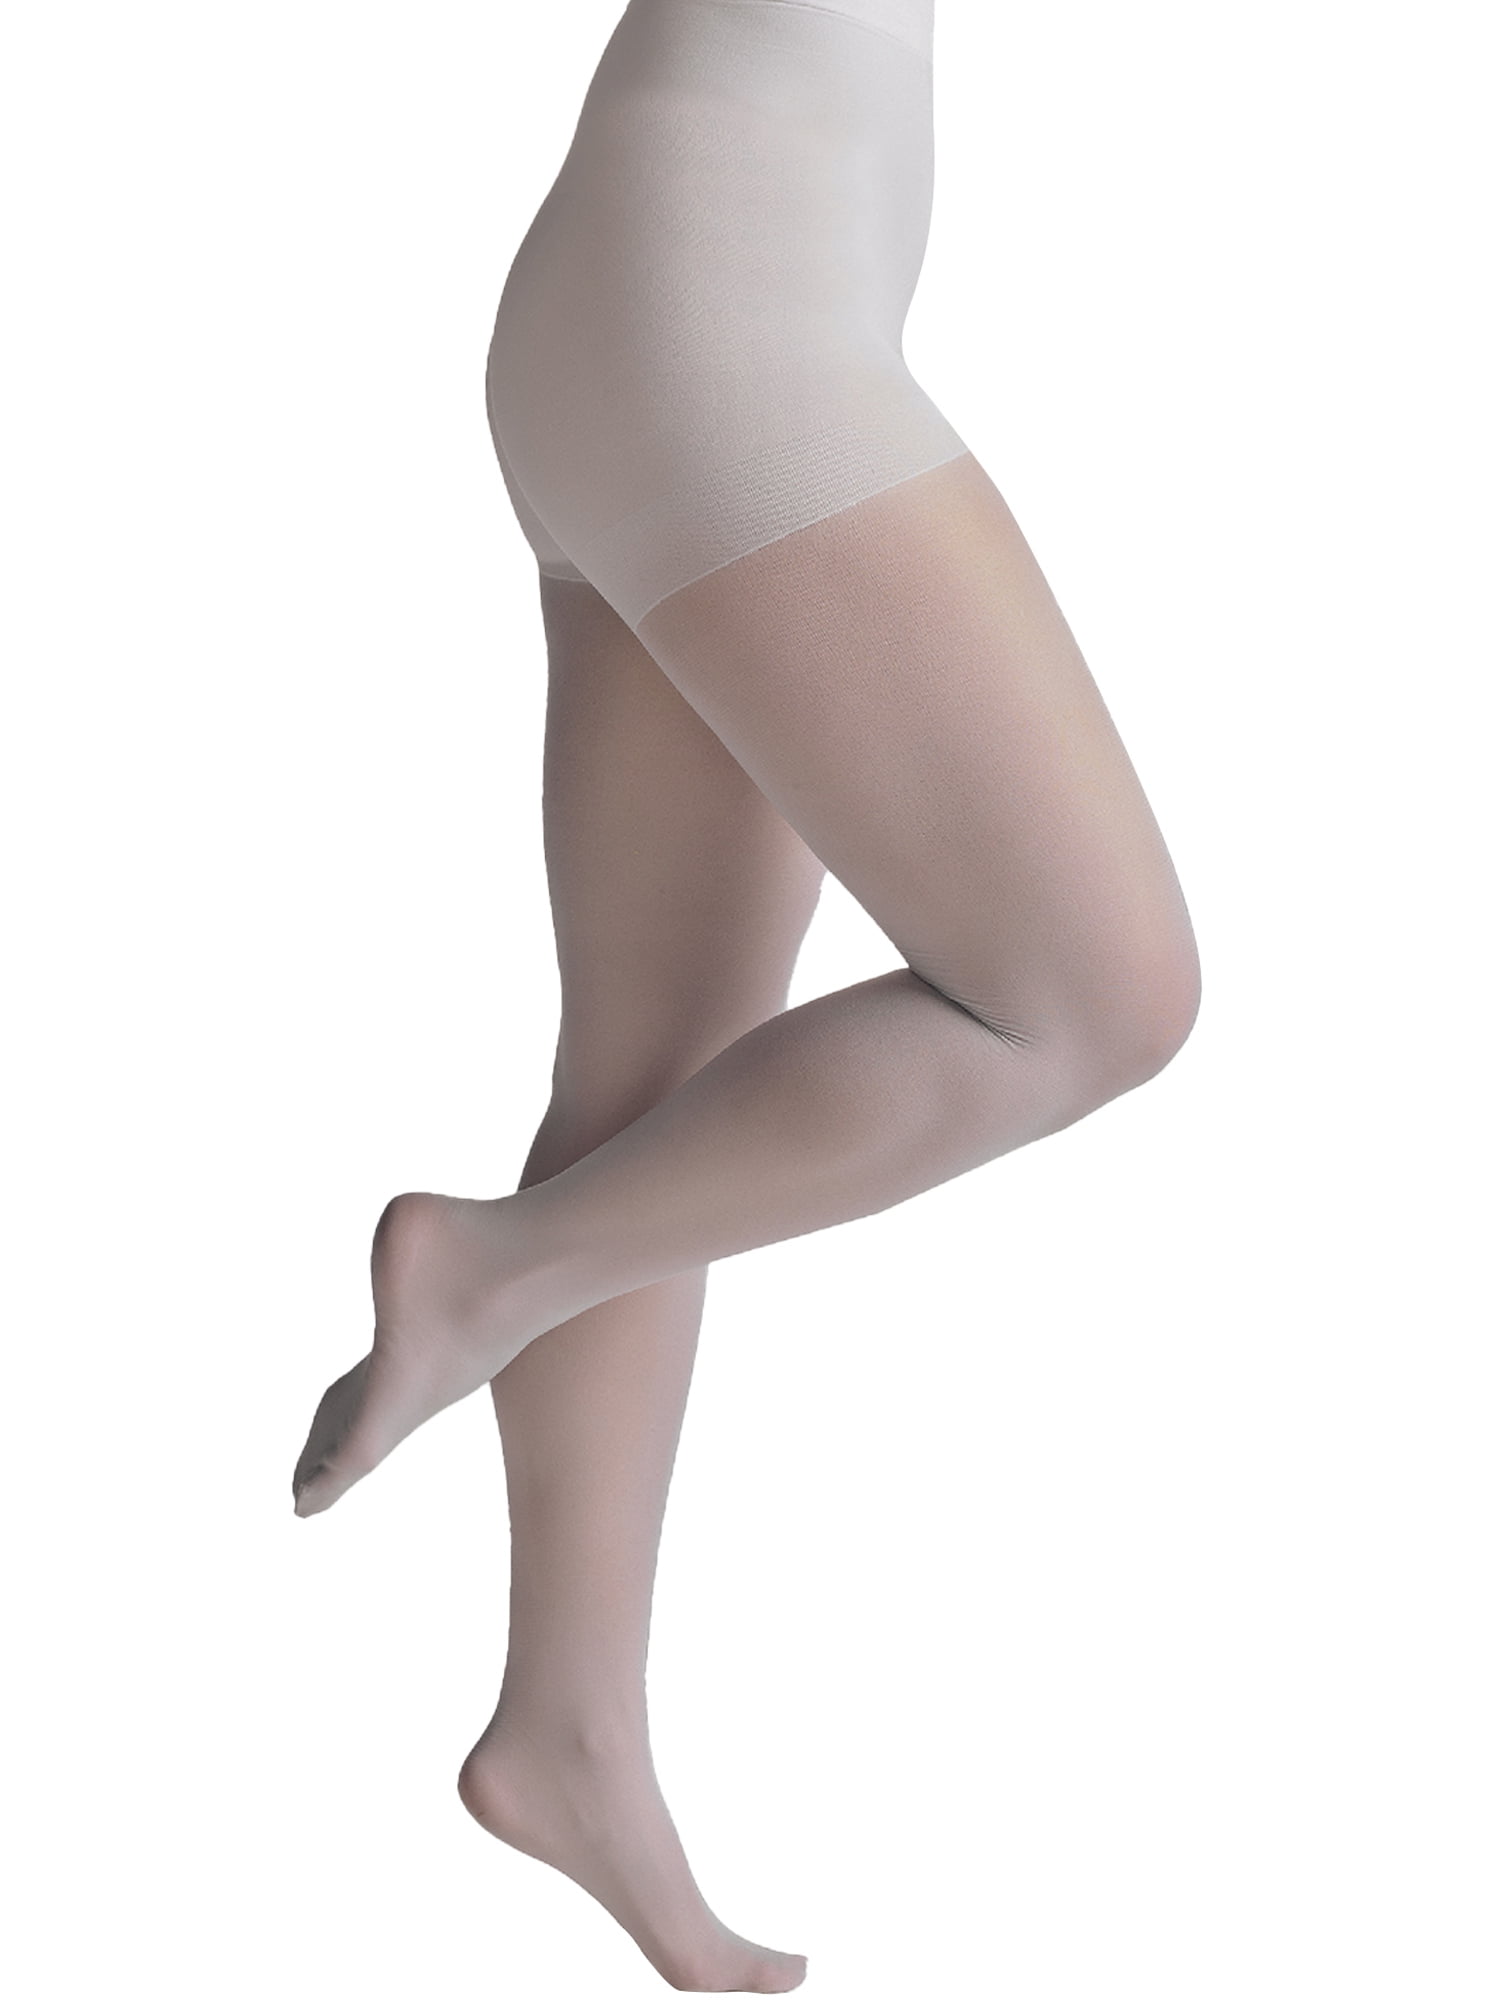 Comfort Choice Women's Plus Size 2-Pack Control Top Tights Tights